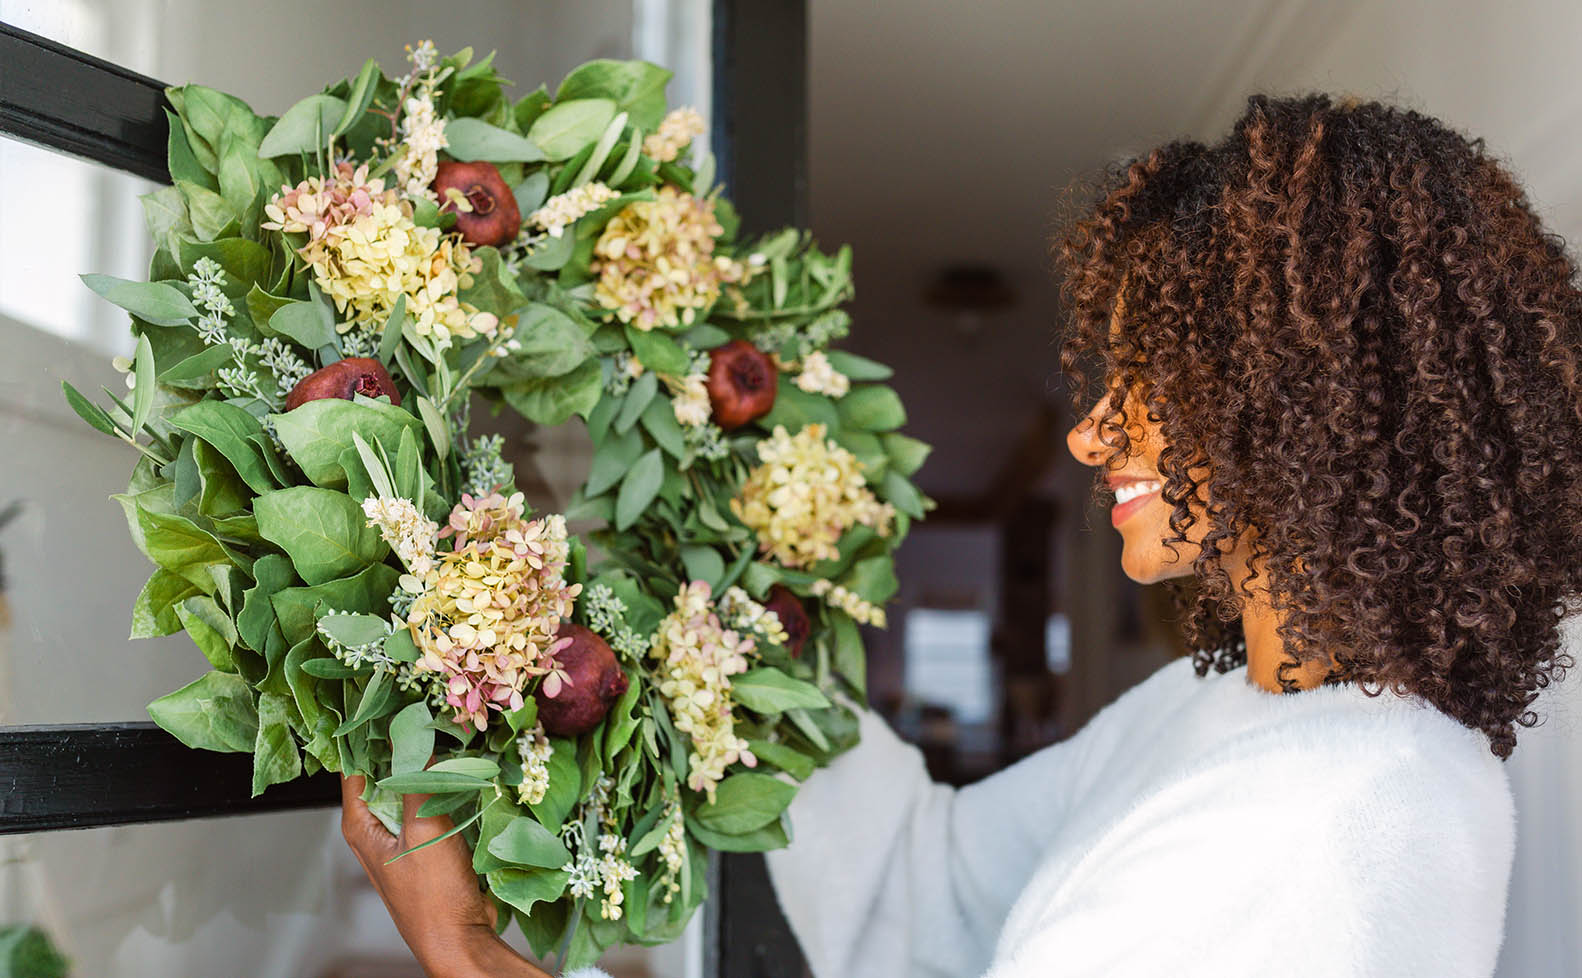 Flower & Plant Same Day Delivery » NYC, DC & Nationwide ...